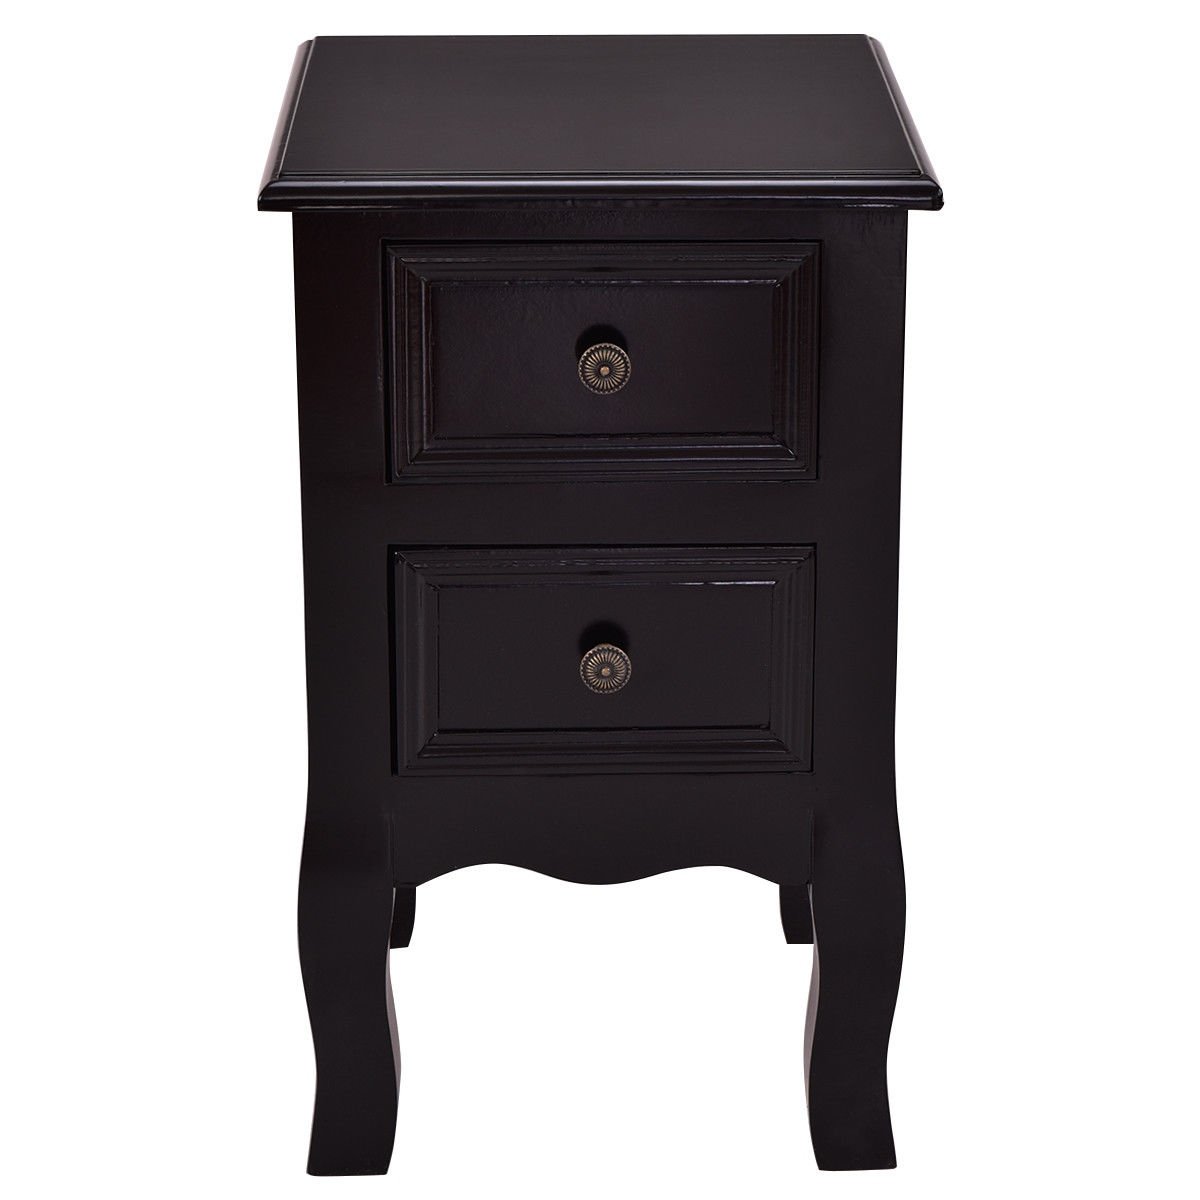 way black night stand storage drawers wood end accent table with free shipping today halloween tablecloth narrow dining for small spaces grey round coffee turquoise glass kitchen